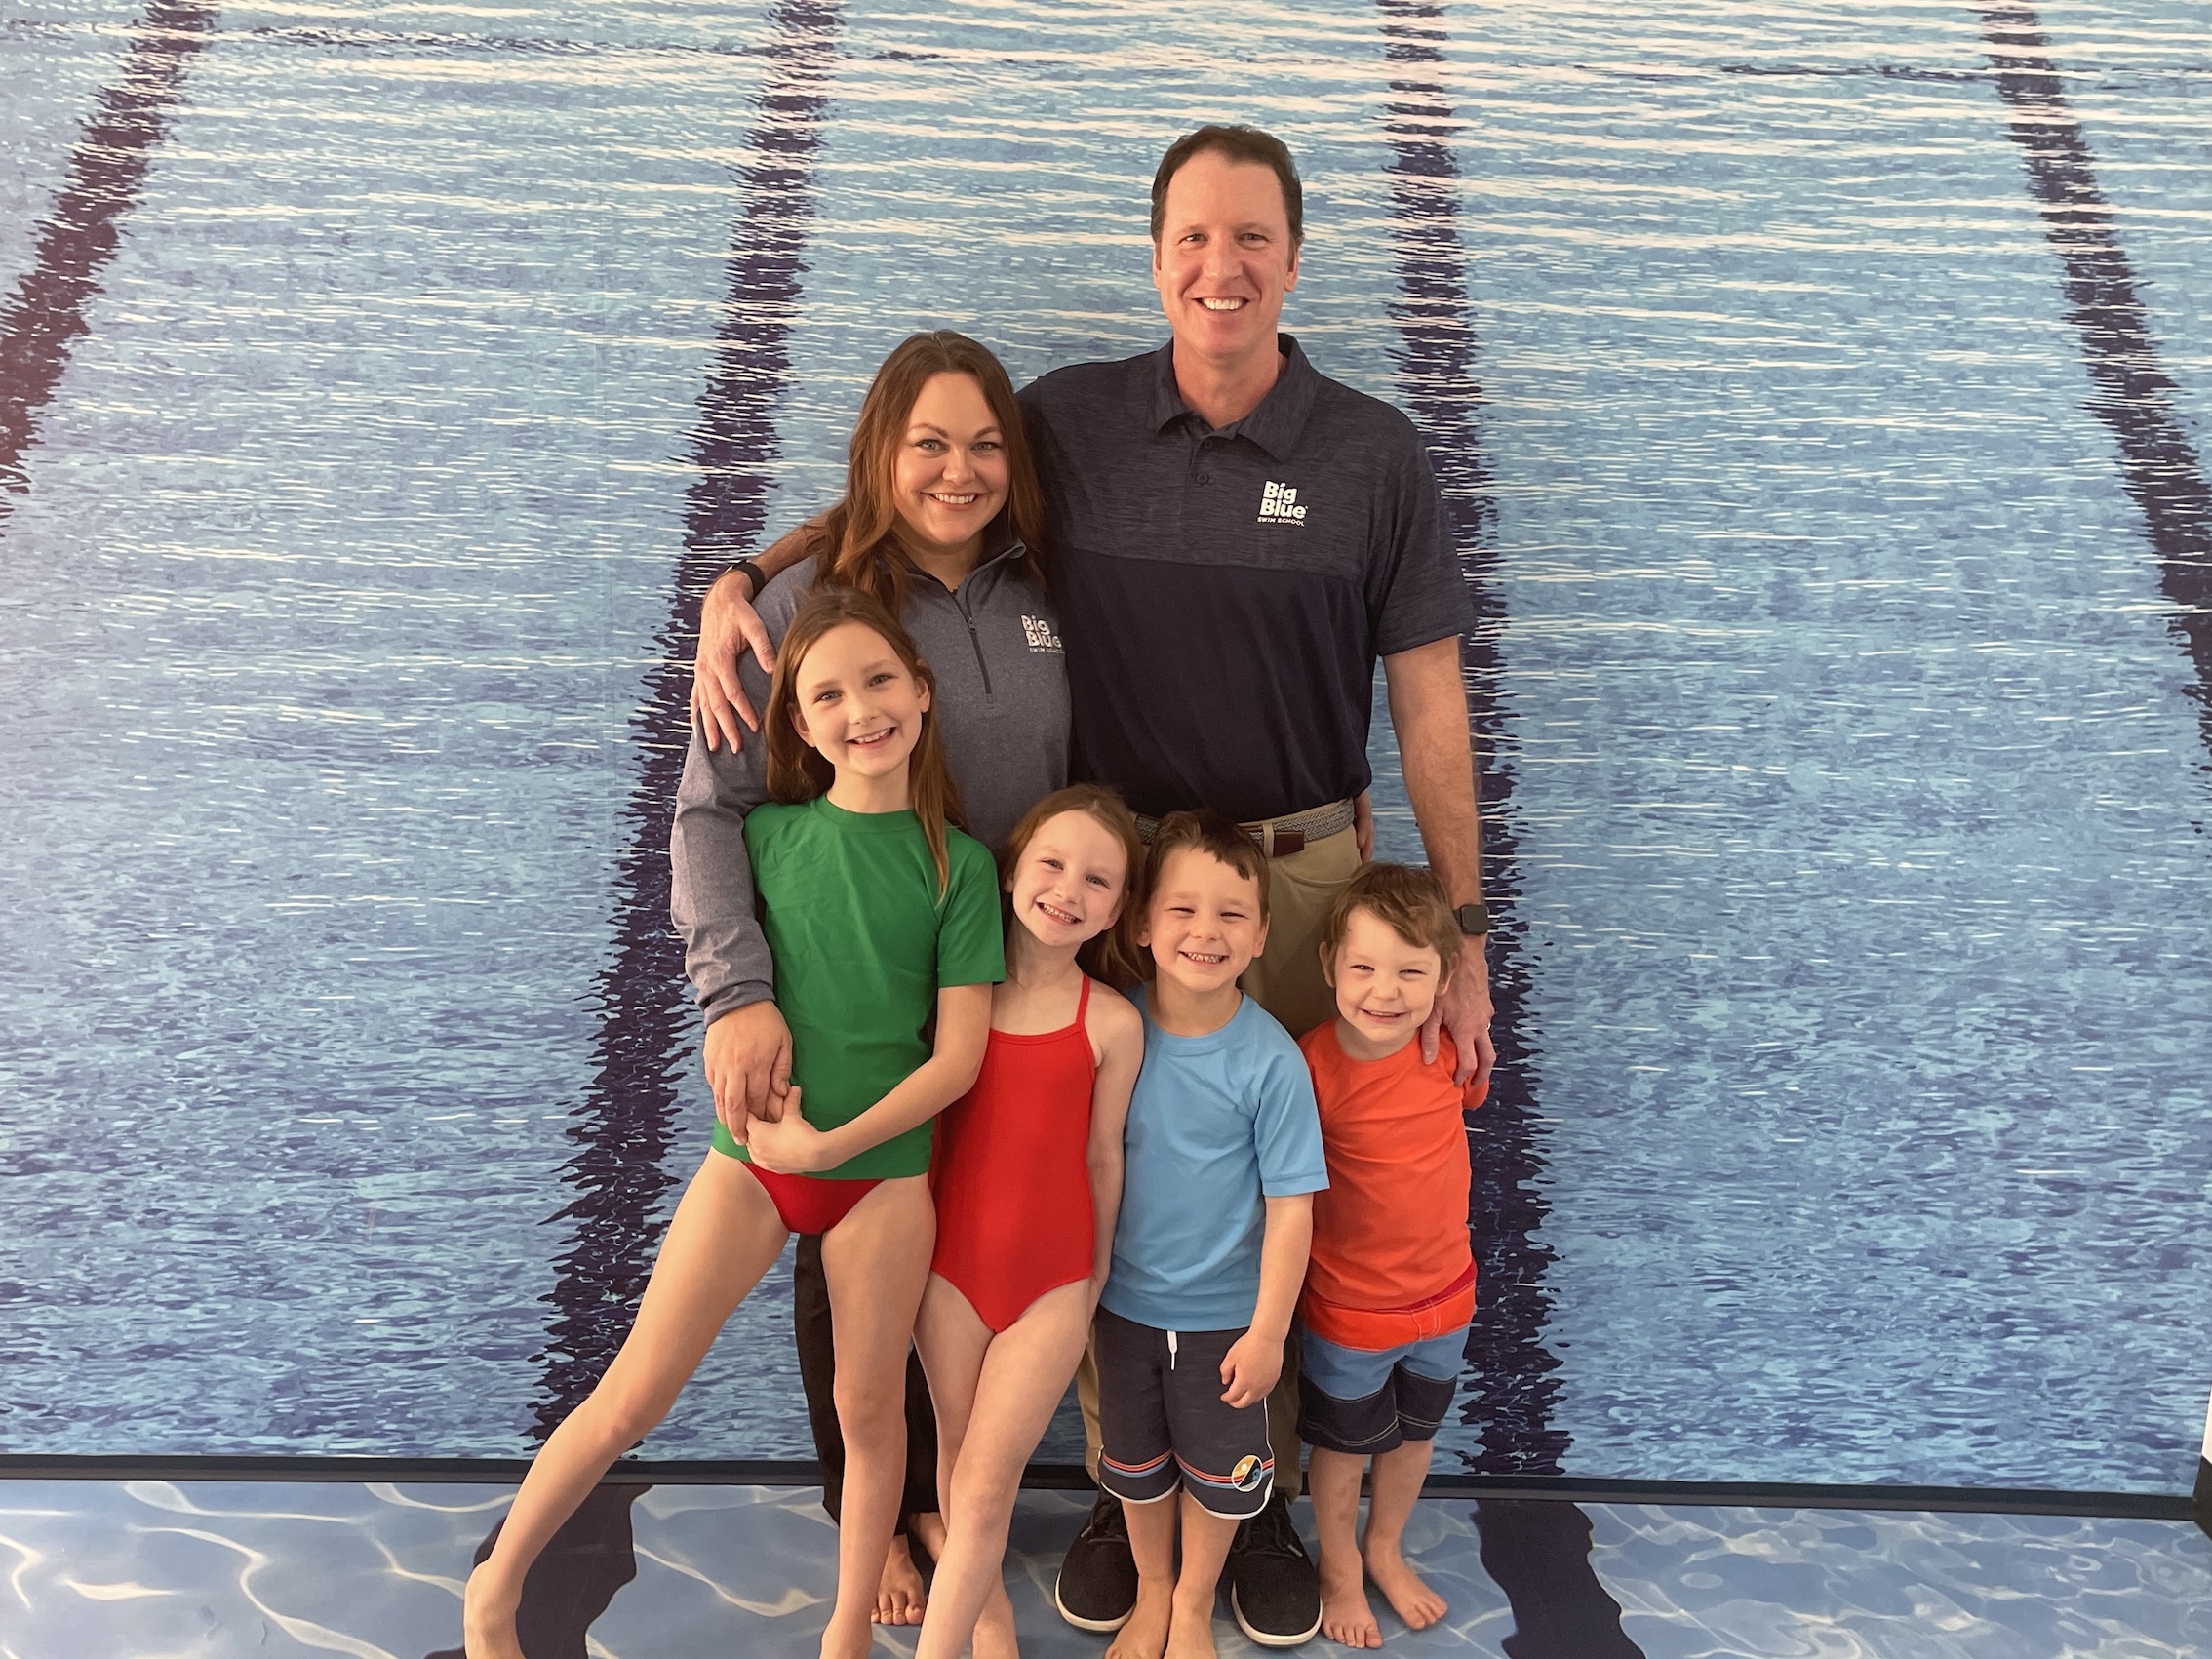 Tom Dolan, a two-time Olympic gold medalist swimmer in the 400-meter Individual Medley, joined Big Blue Swim School to expand and manage pools in Northern Virginia and along the East Coast.